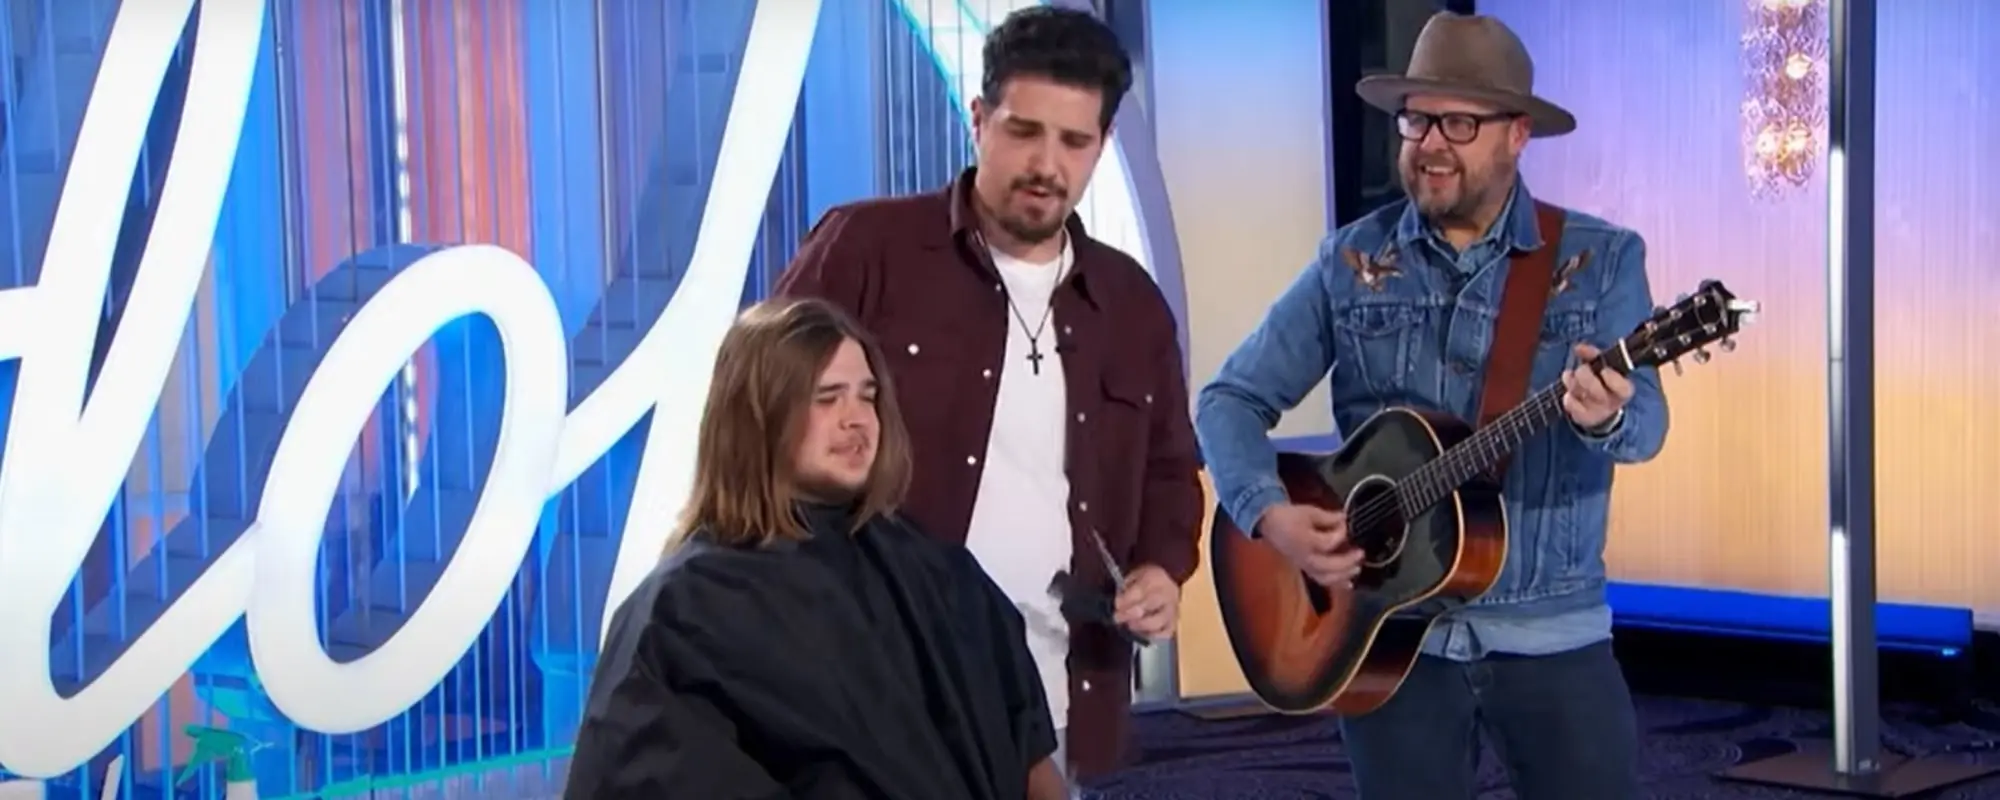 Noah “The Singing Barber” Gives a Haircut Mid-Audition, Wows With Sharp Rascal Flatts Cover on ‘American Idol’